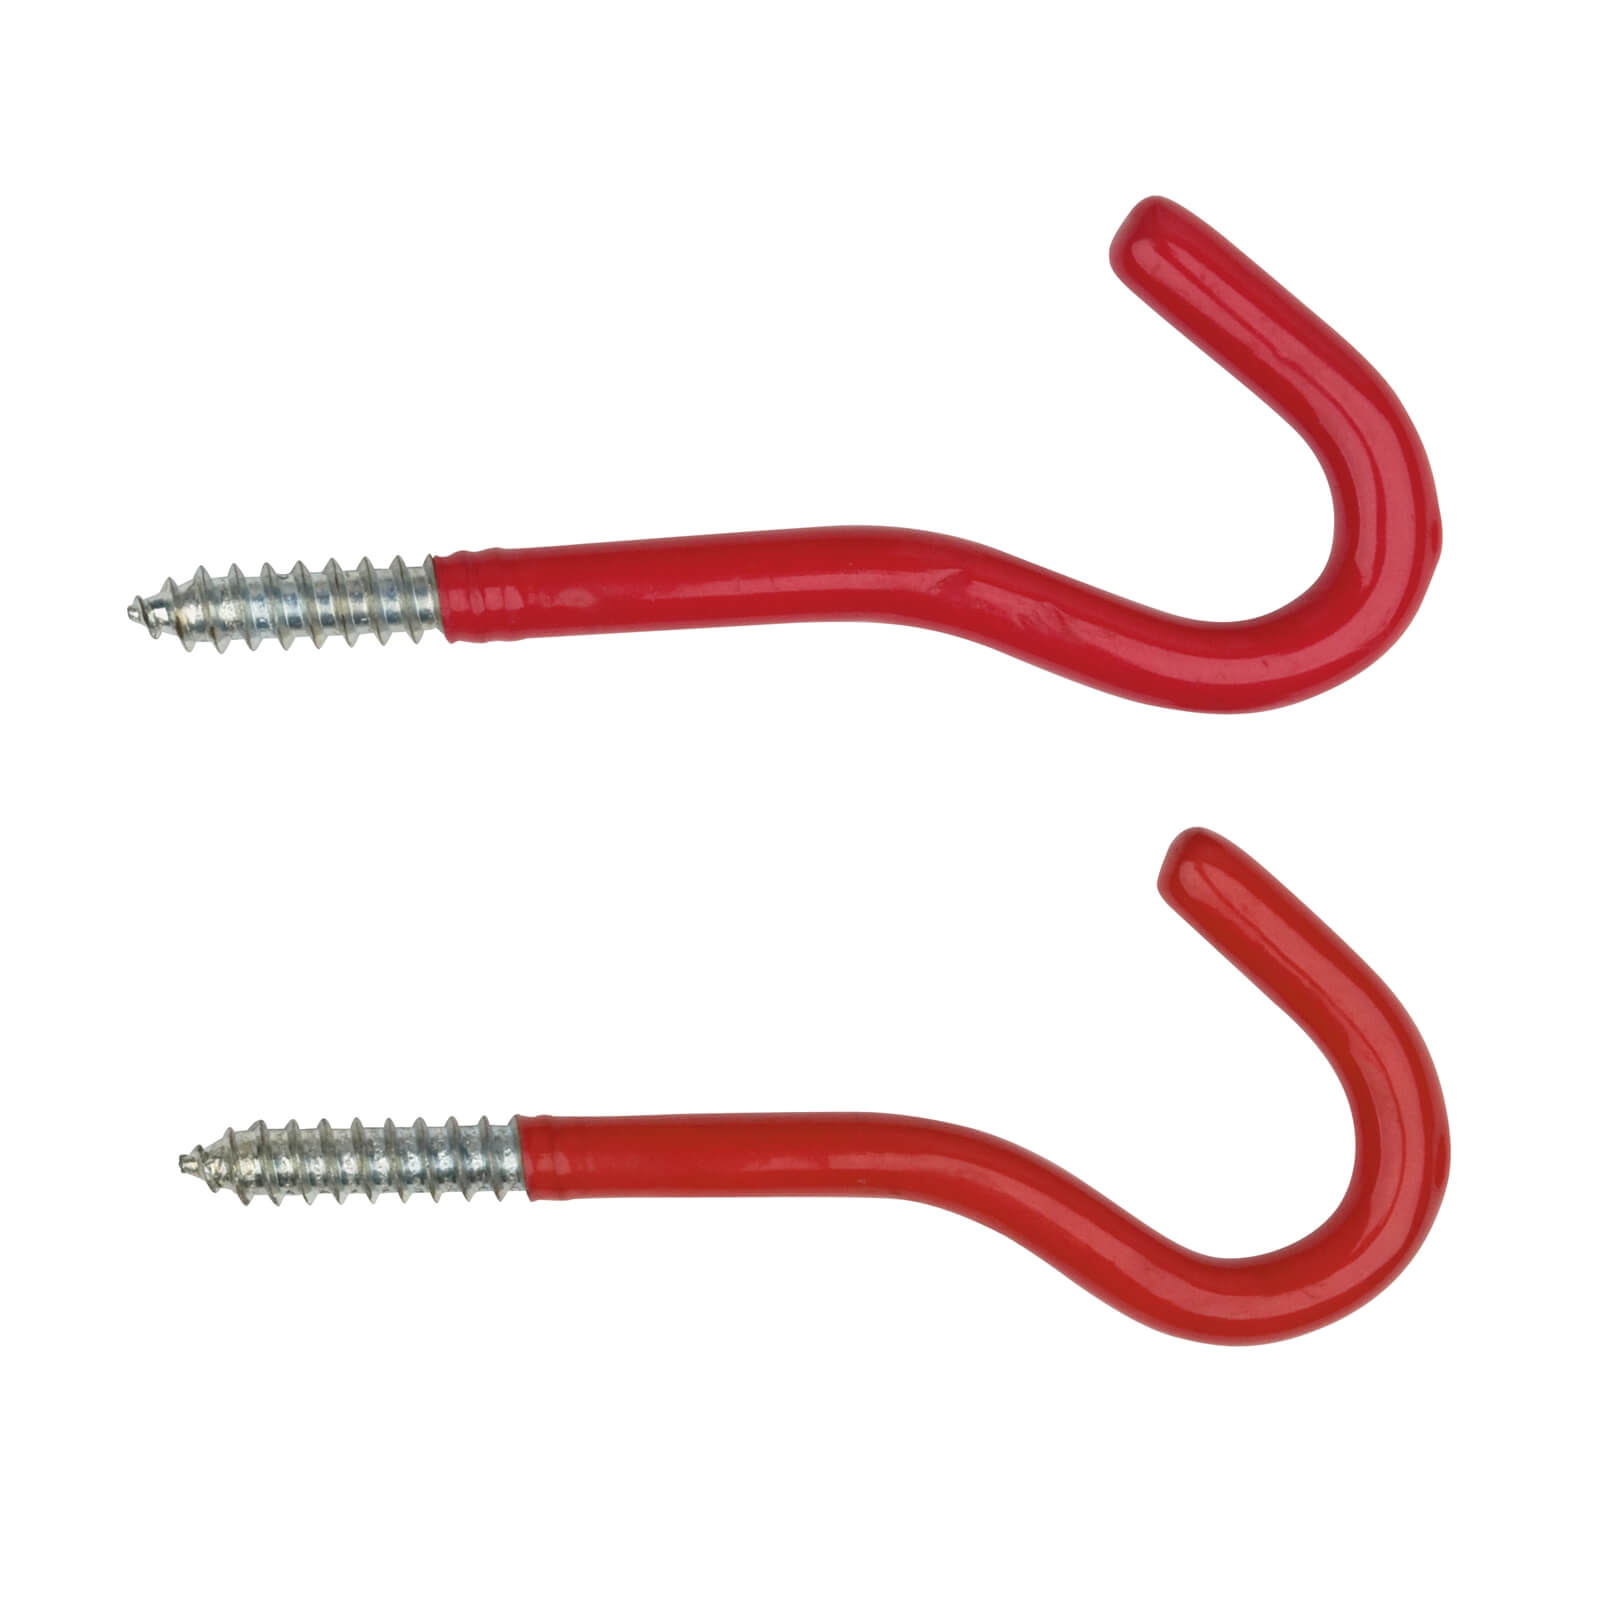 Photo of Round Utility Hook - Red - 2 Pack